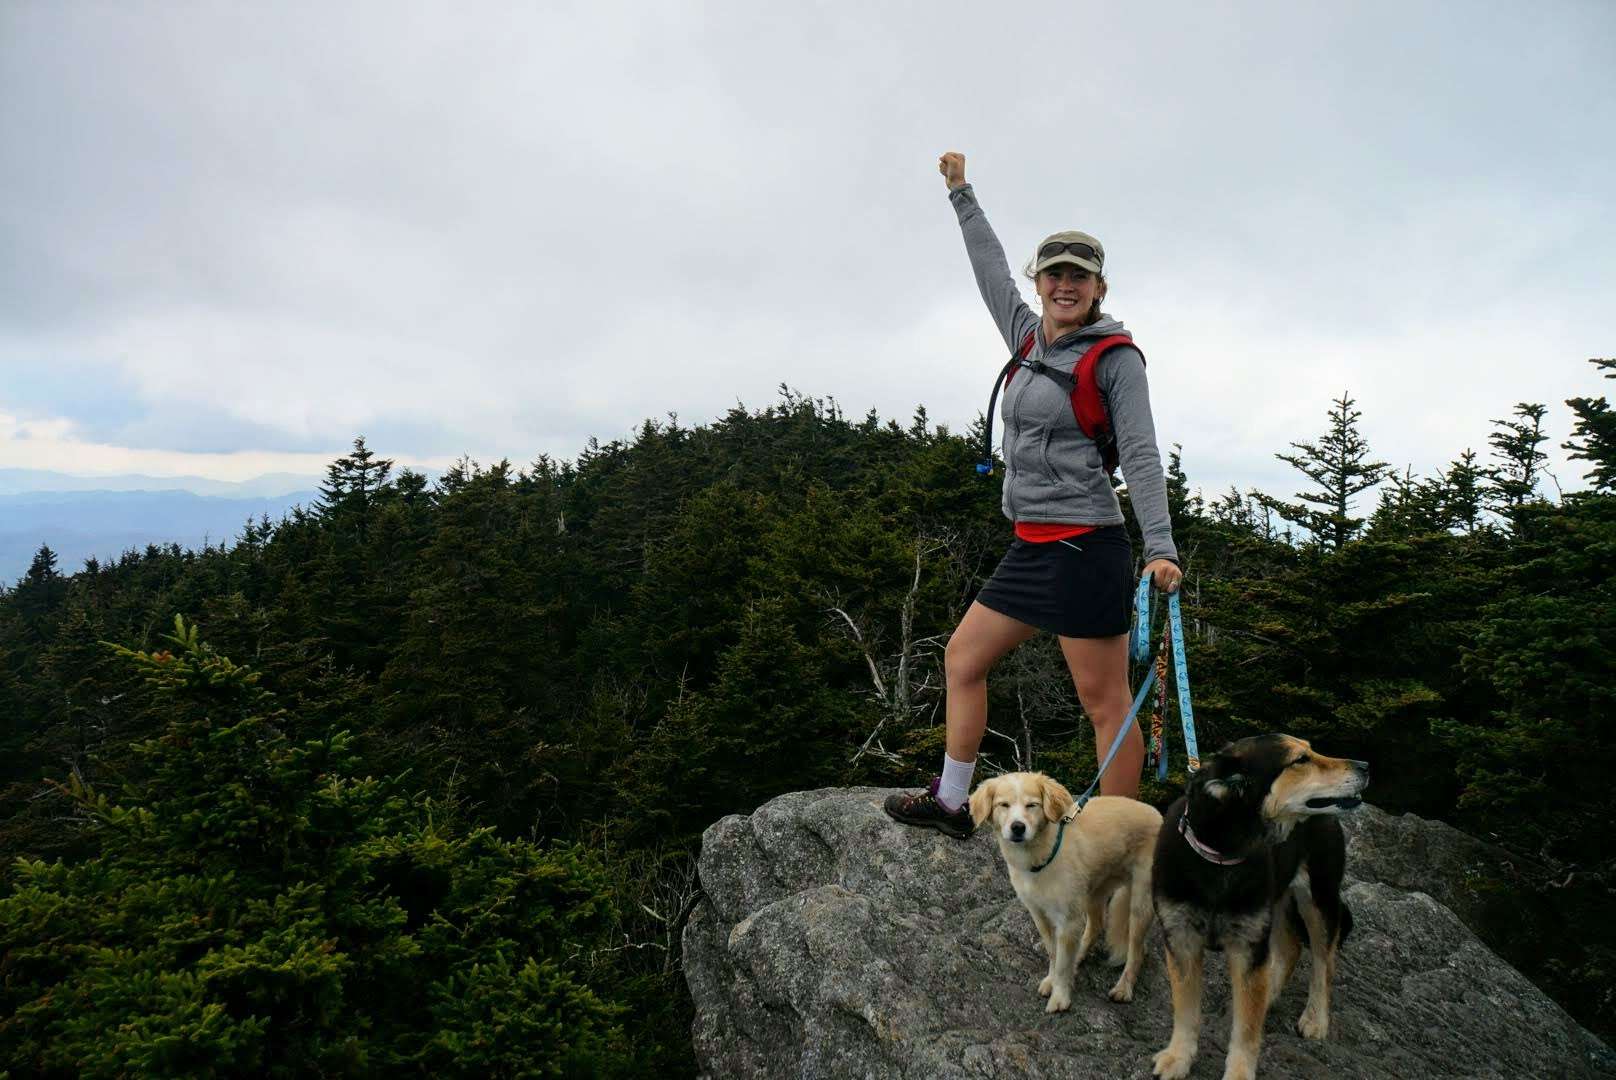 Caitlin from Mortons on the Move and dogs hiking together